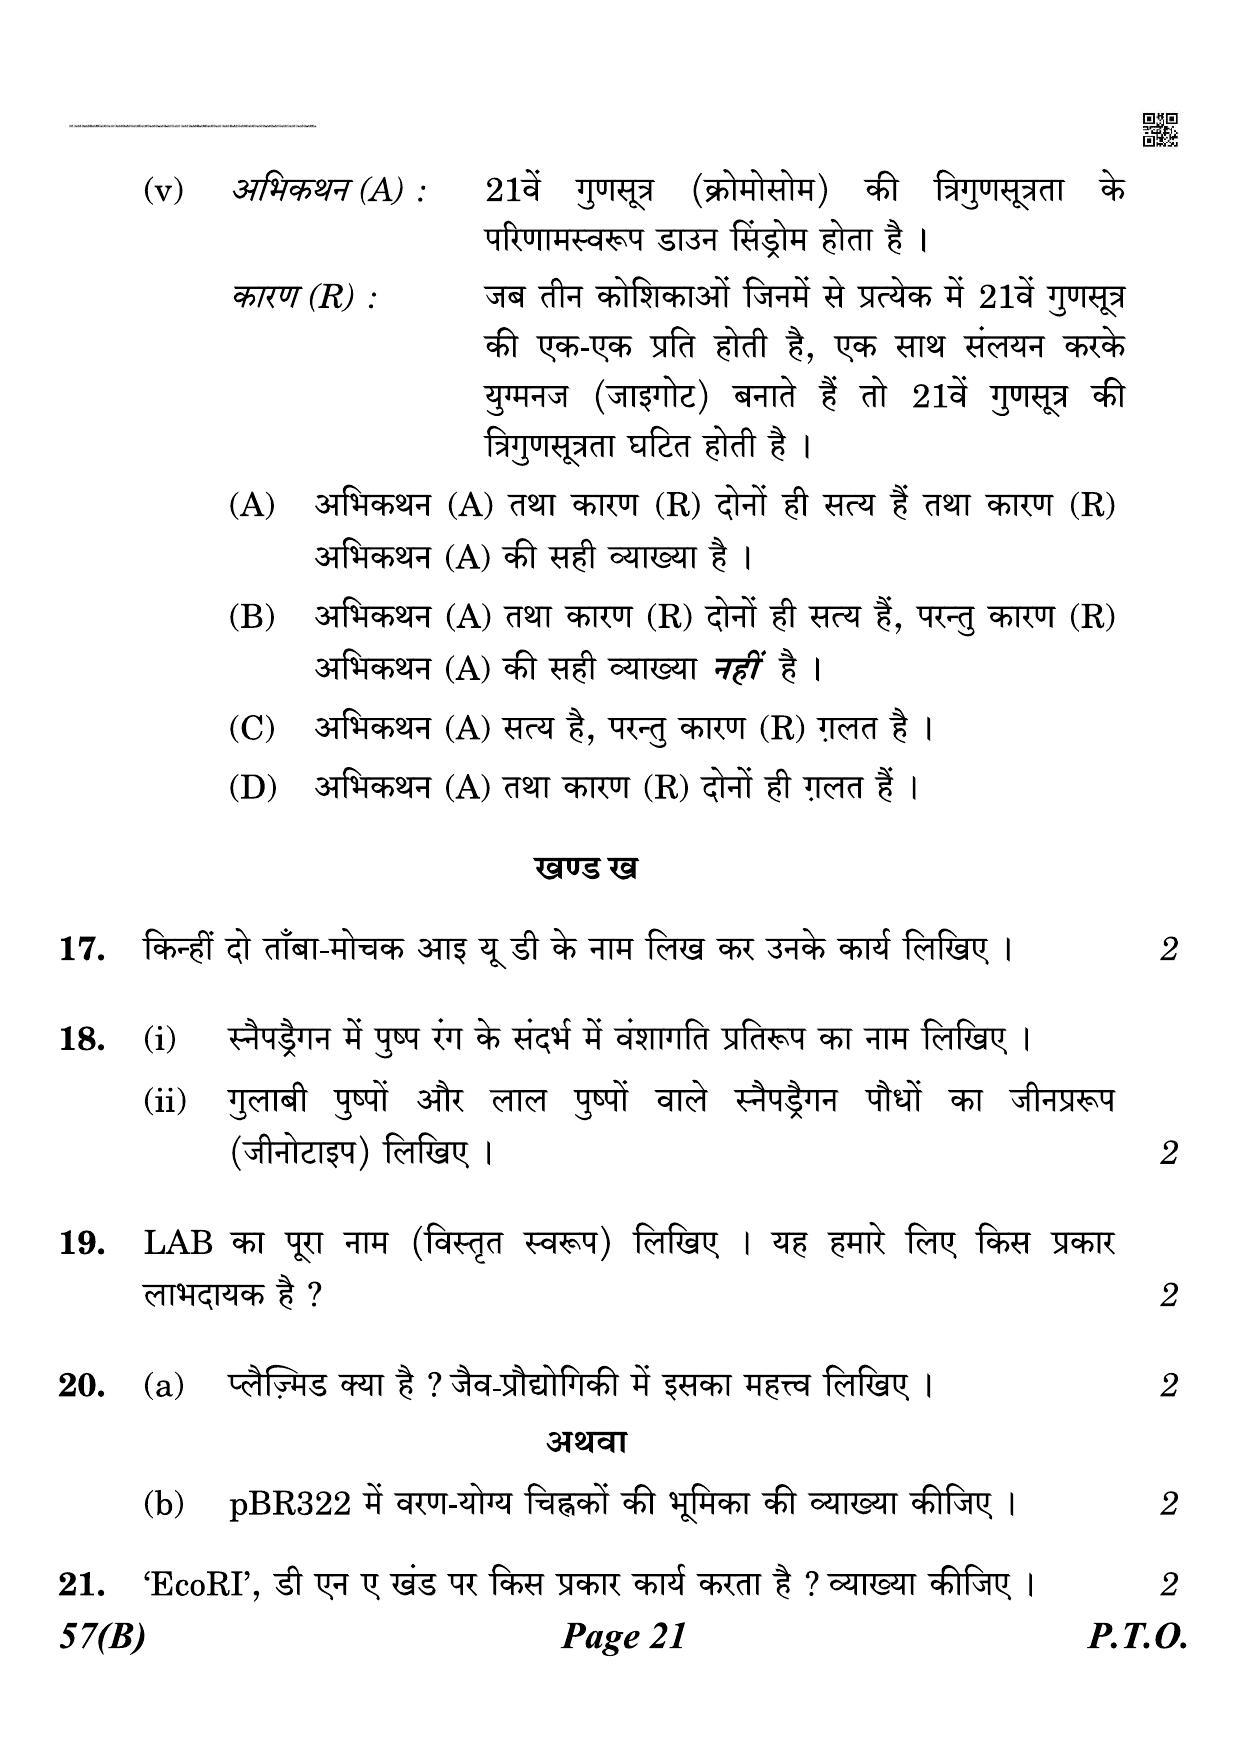 CBSE Class 12 QP_044_biology_for_visually_impared_candidates 2021 Compartment Question Paper - Page 21